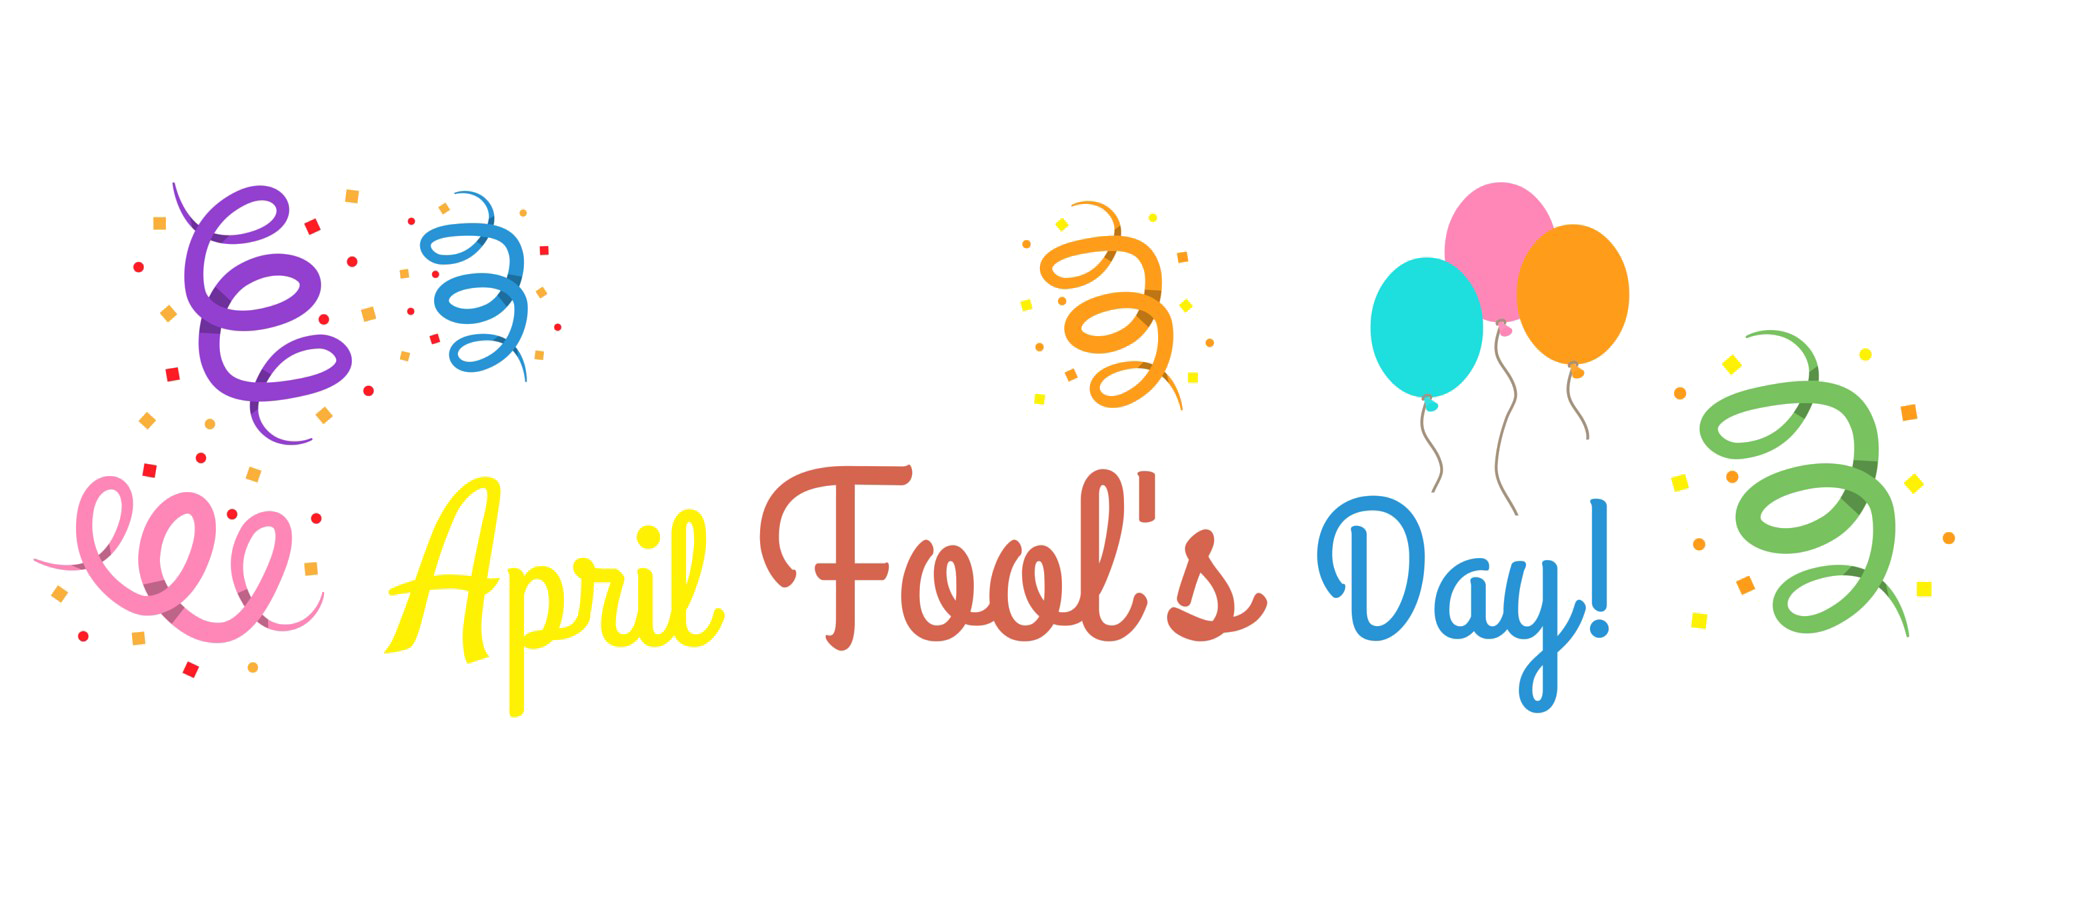 April Fools Day PNG Image Background